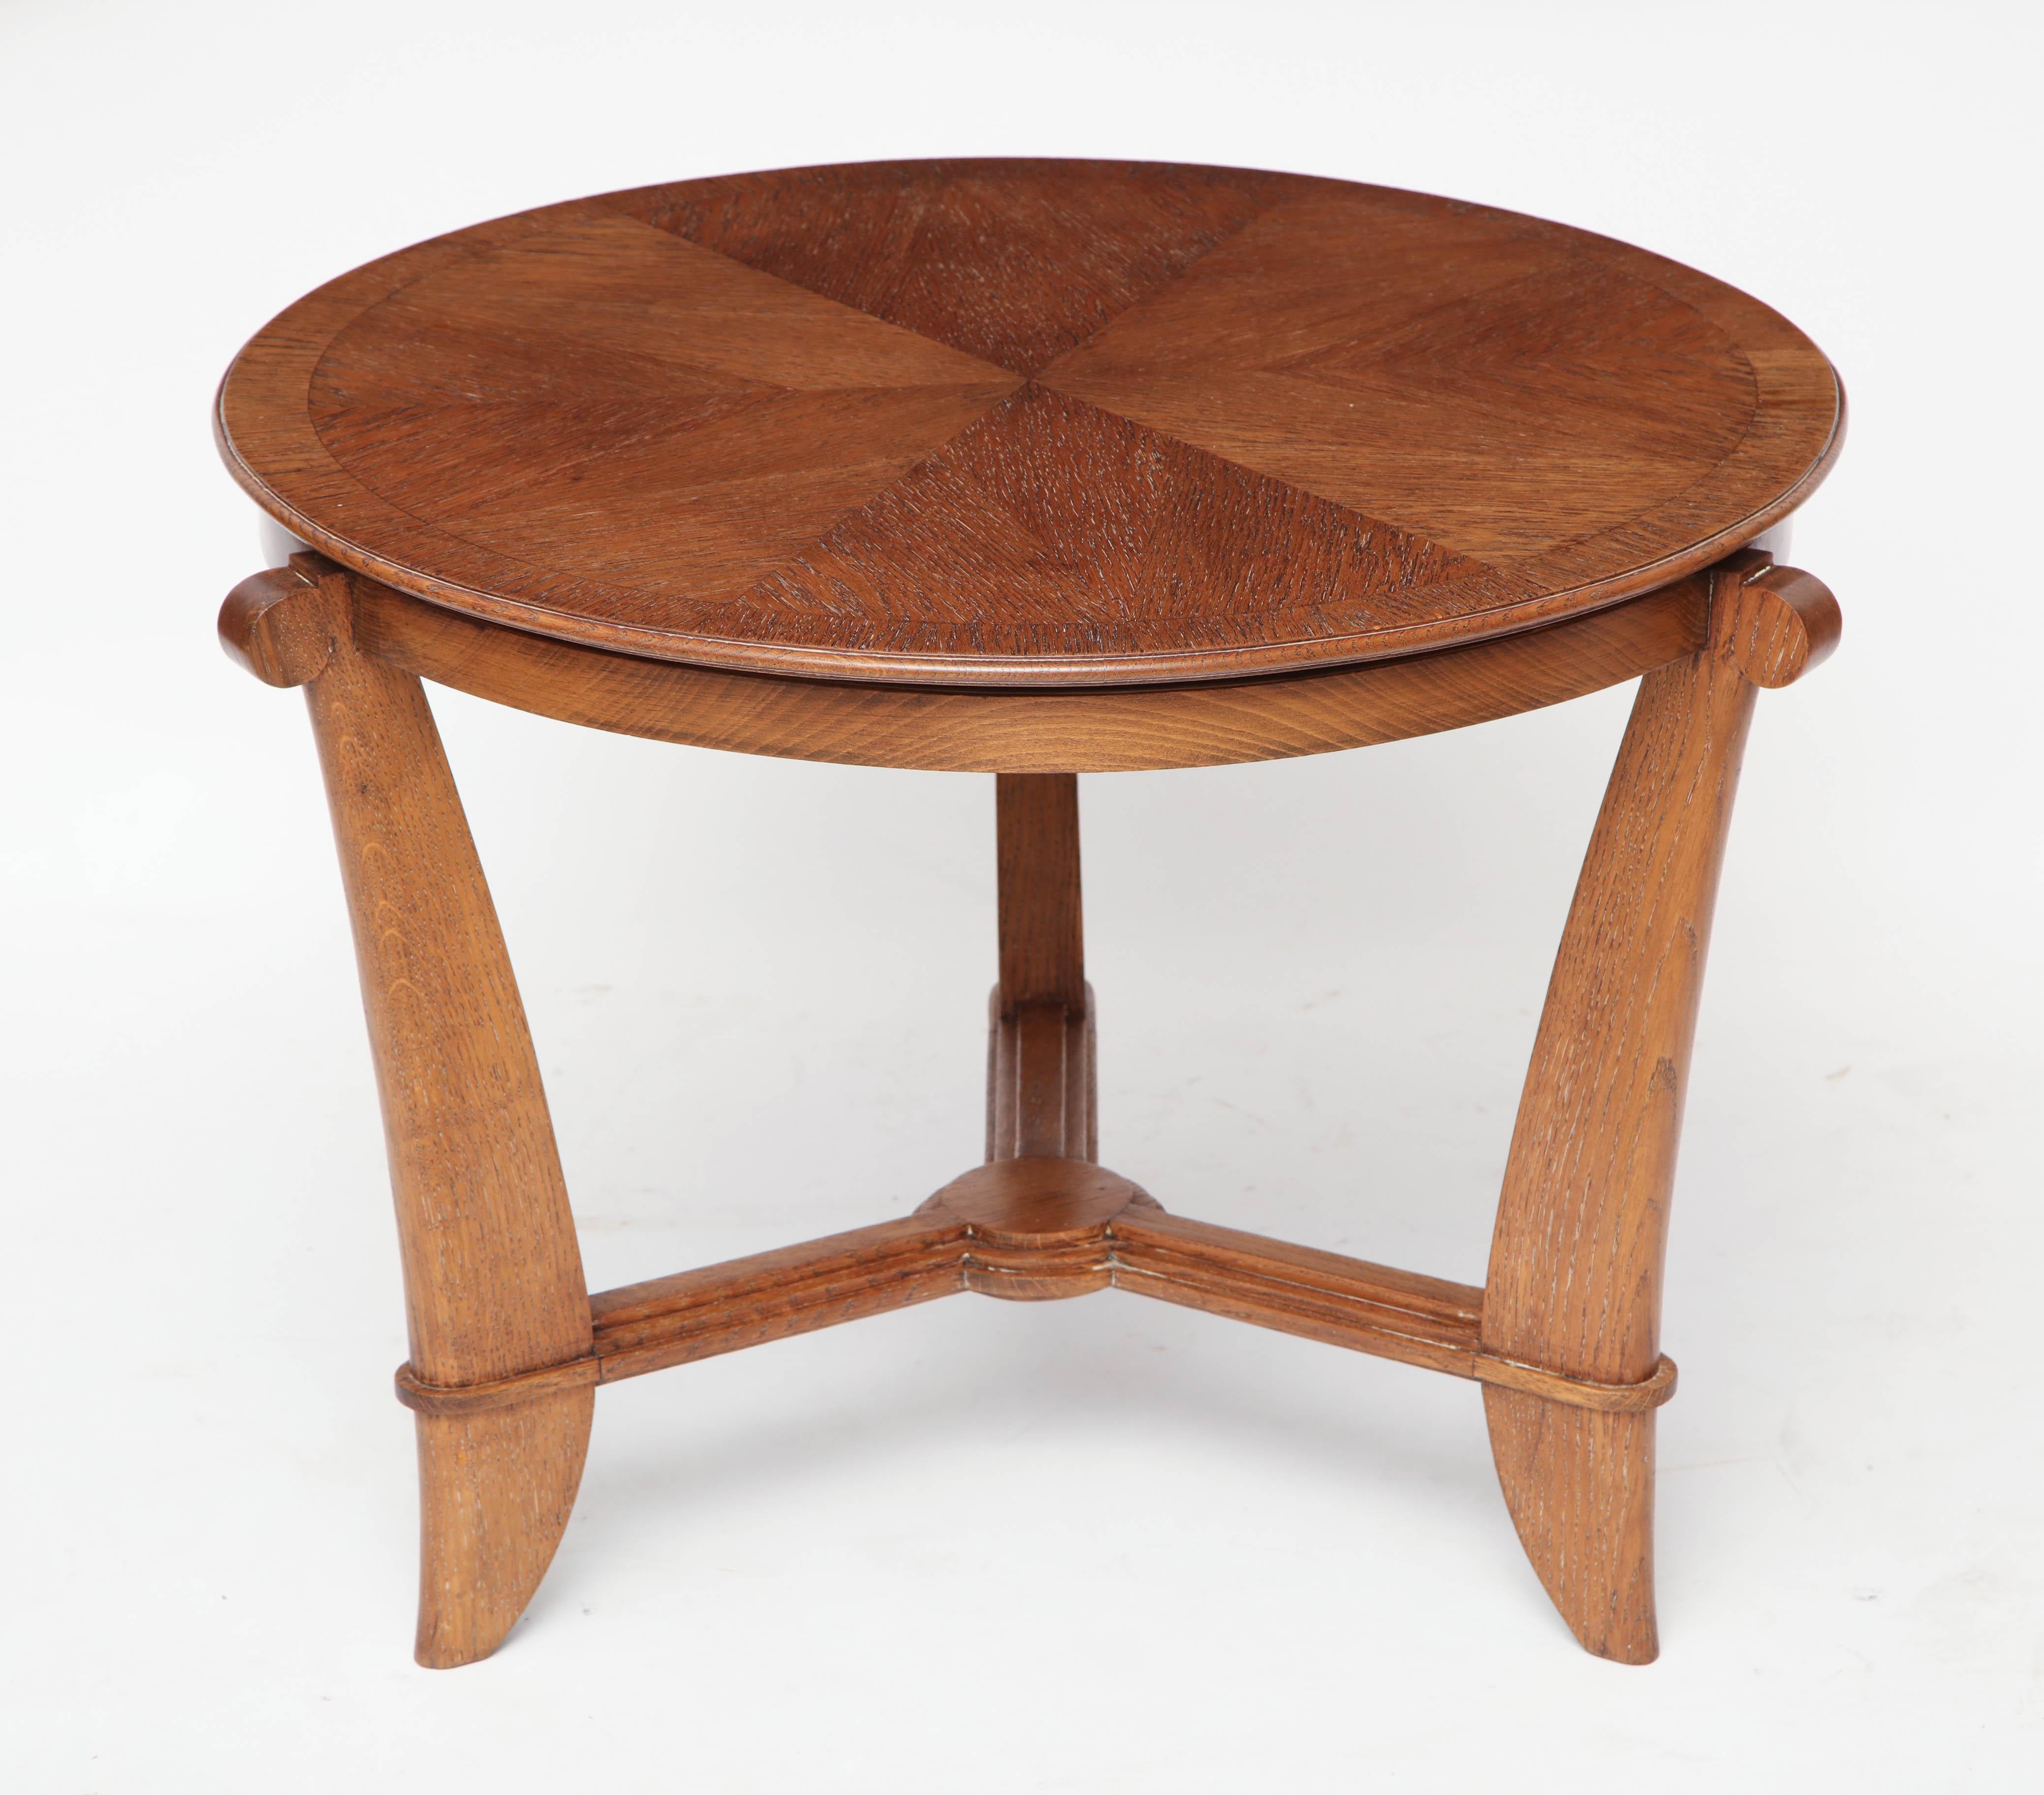 French Art Deco Circular Oak Side Table with Shaped Legs In Excellent Condition For Sale In New York, NY